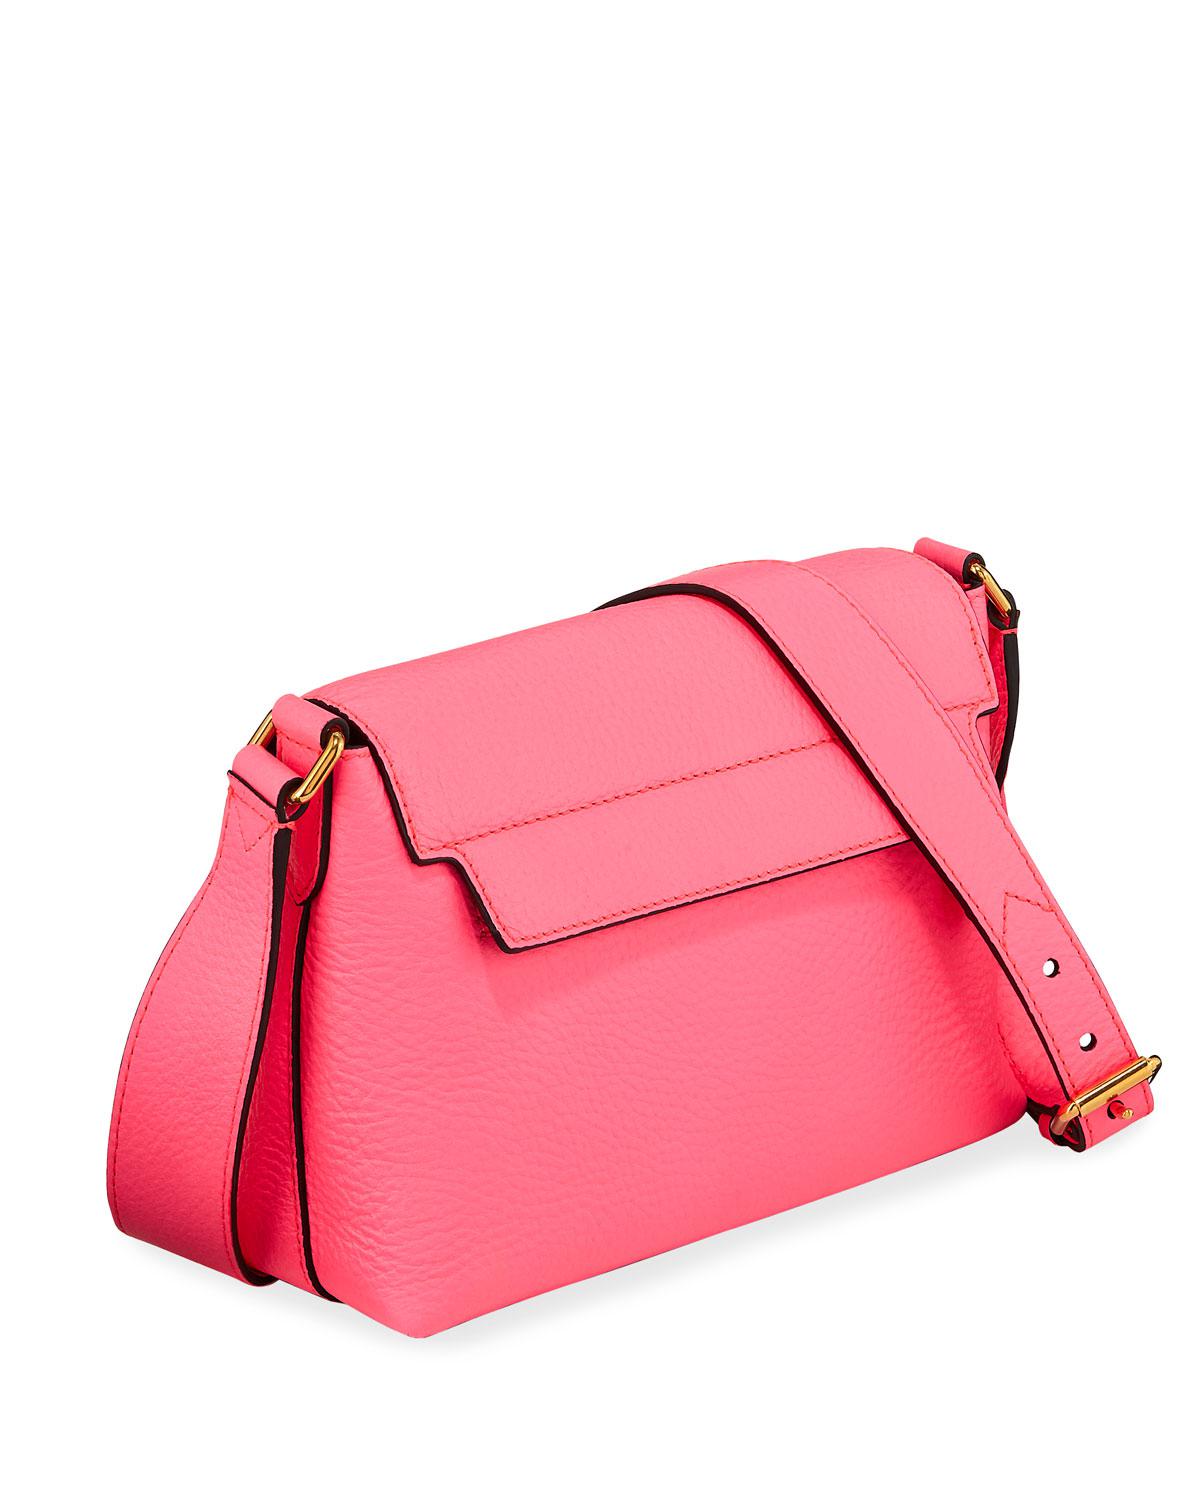 Burberry Burleigh Small Soft Leather Crossbody Bag in Pink - Lyst